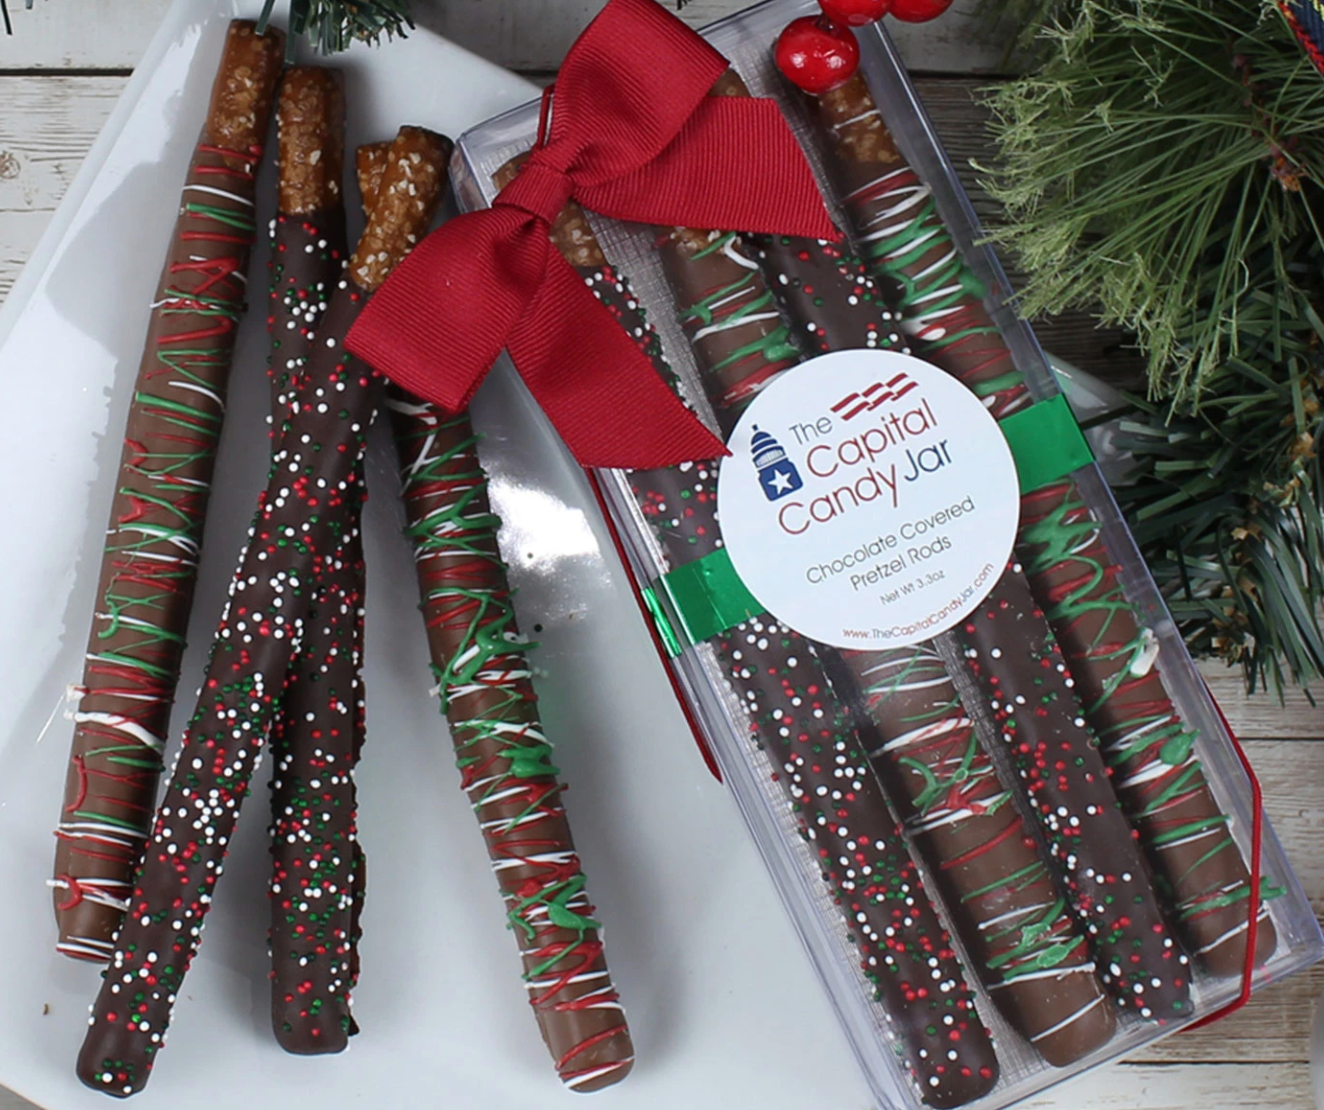 CCJ Chocolate Covered Pretzels Holiday